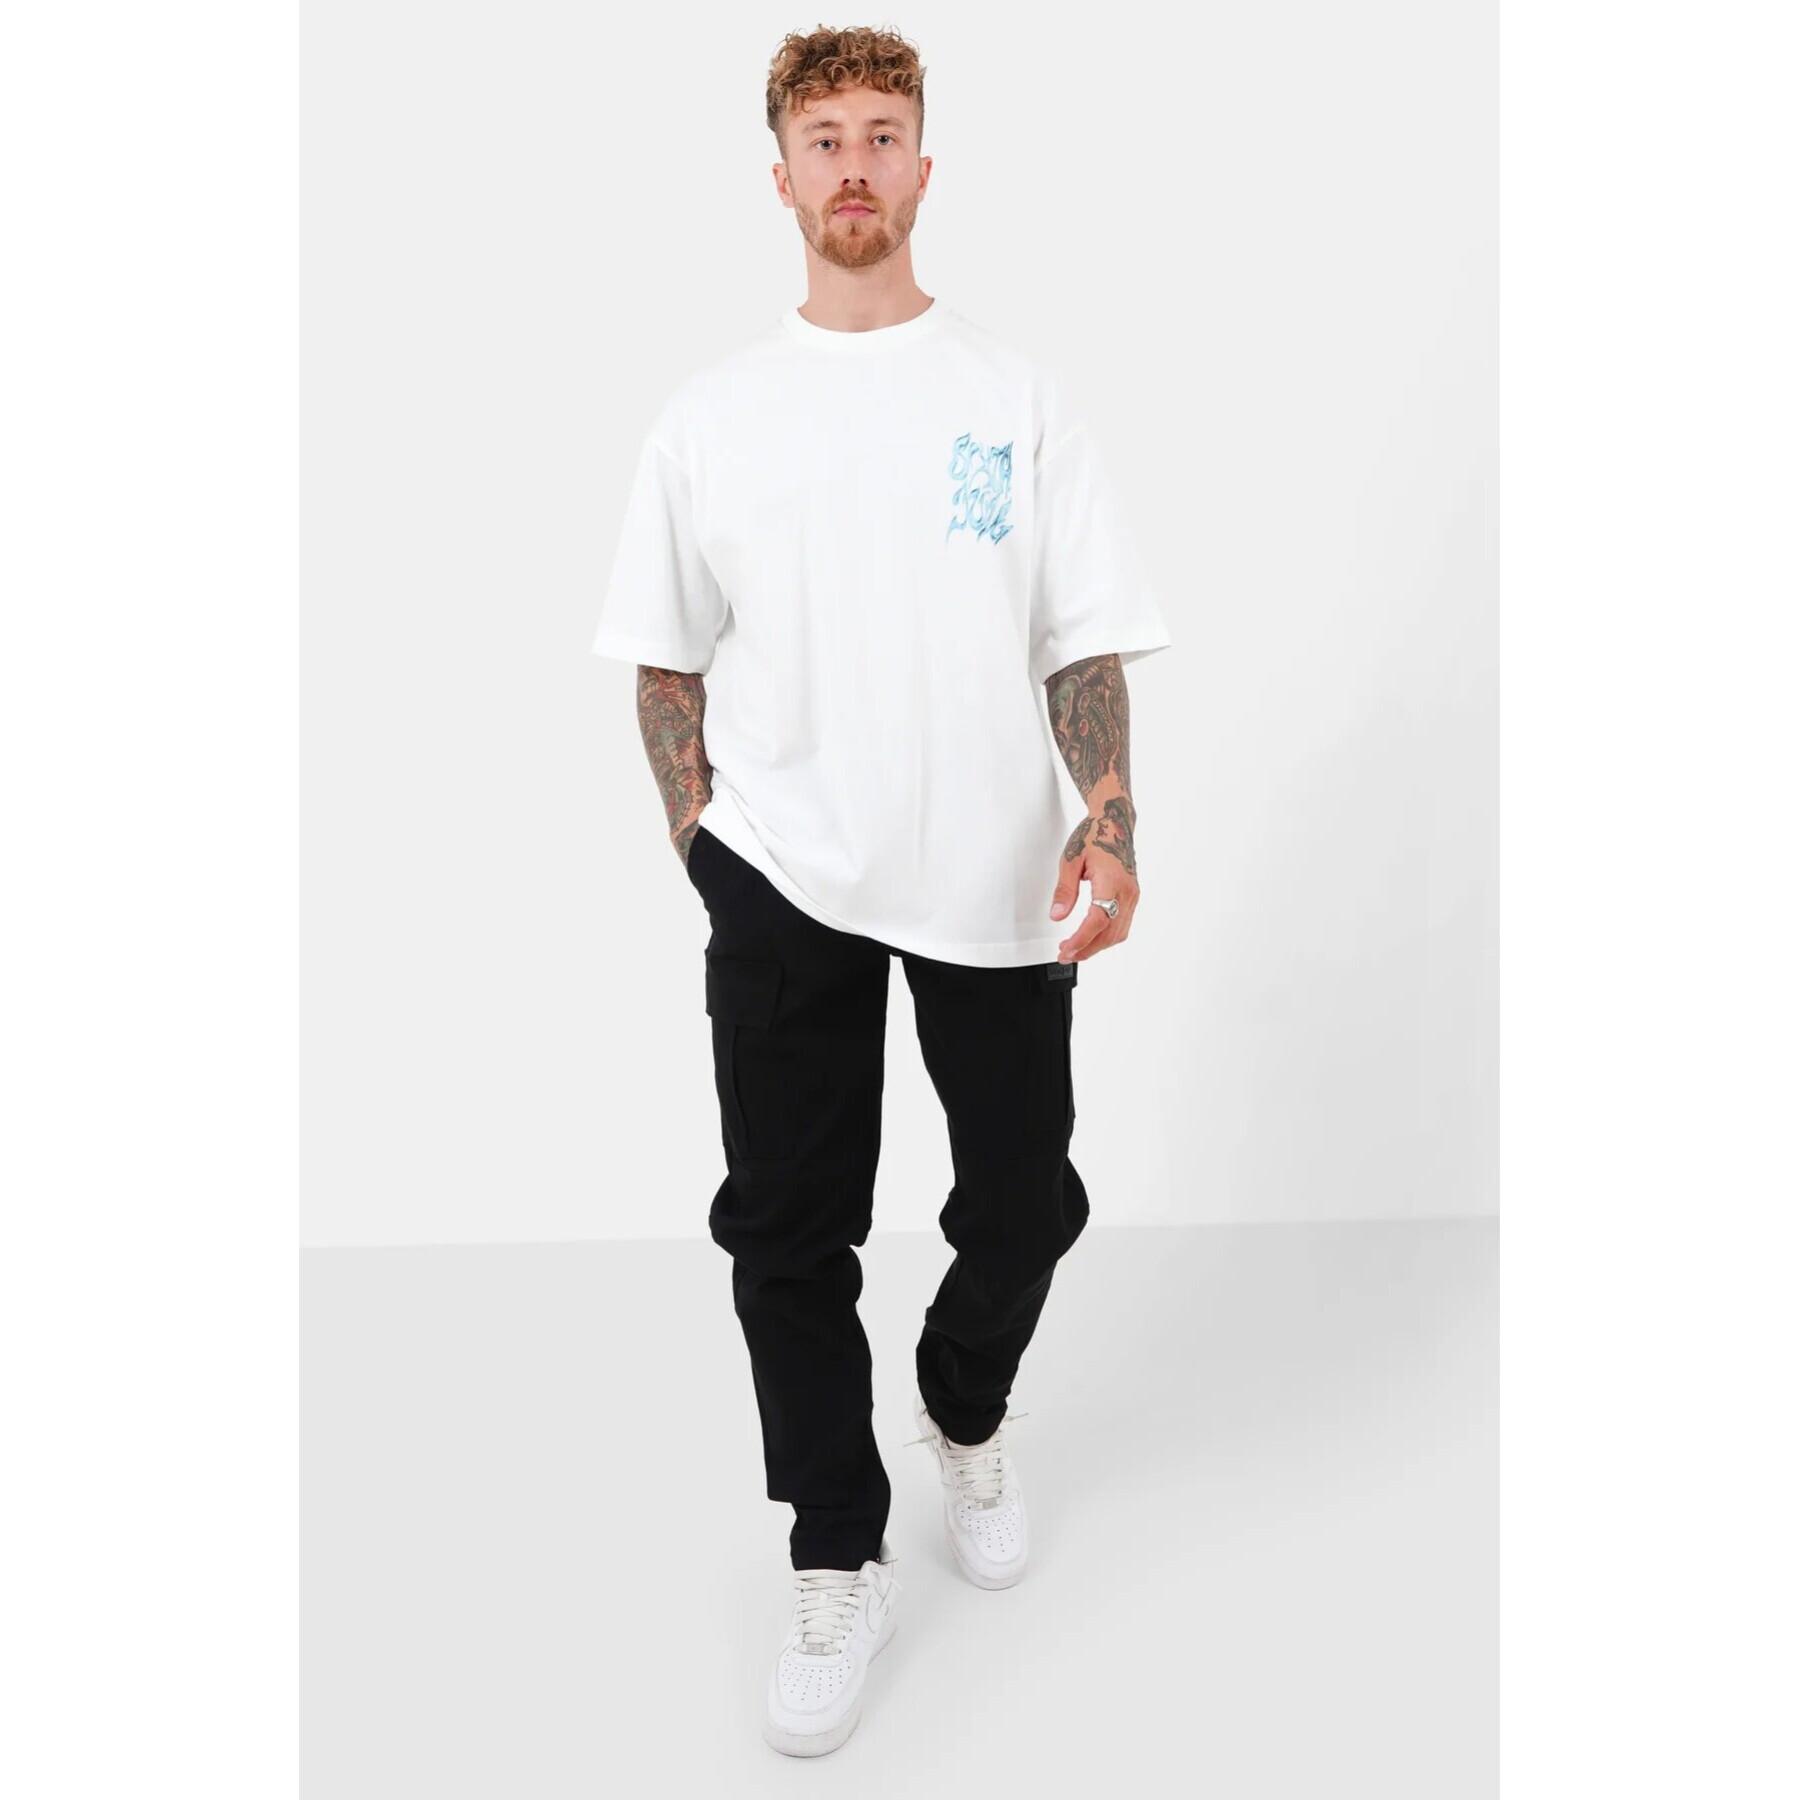 Fitted, embroidered cargo pants Sixth June